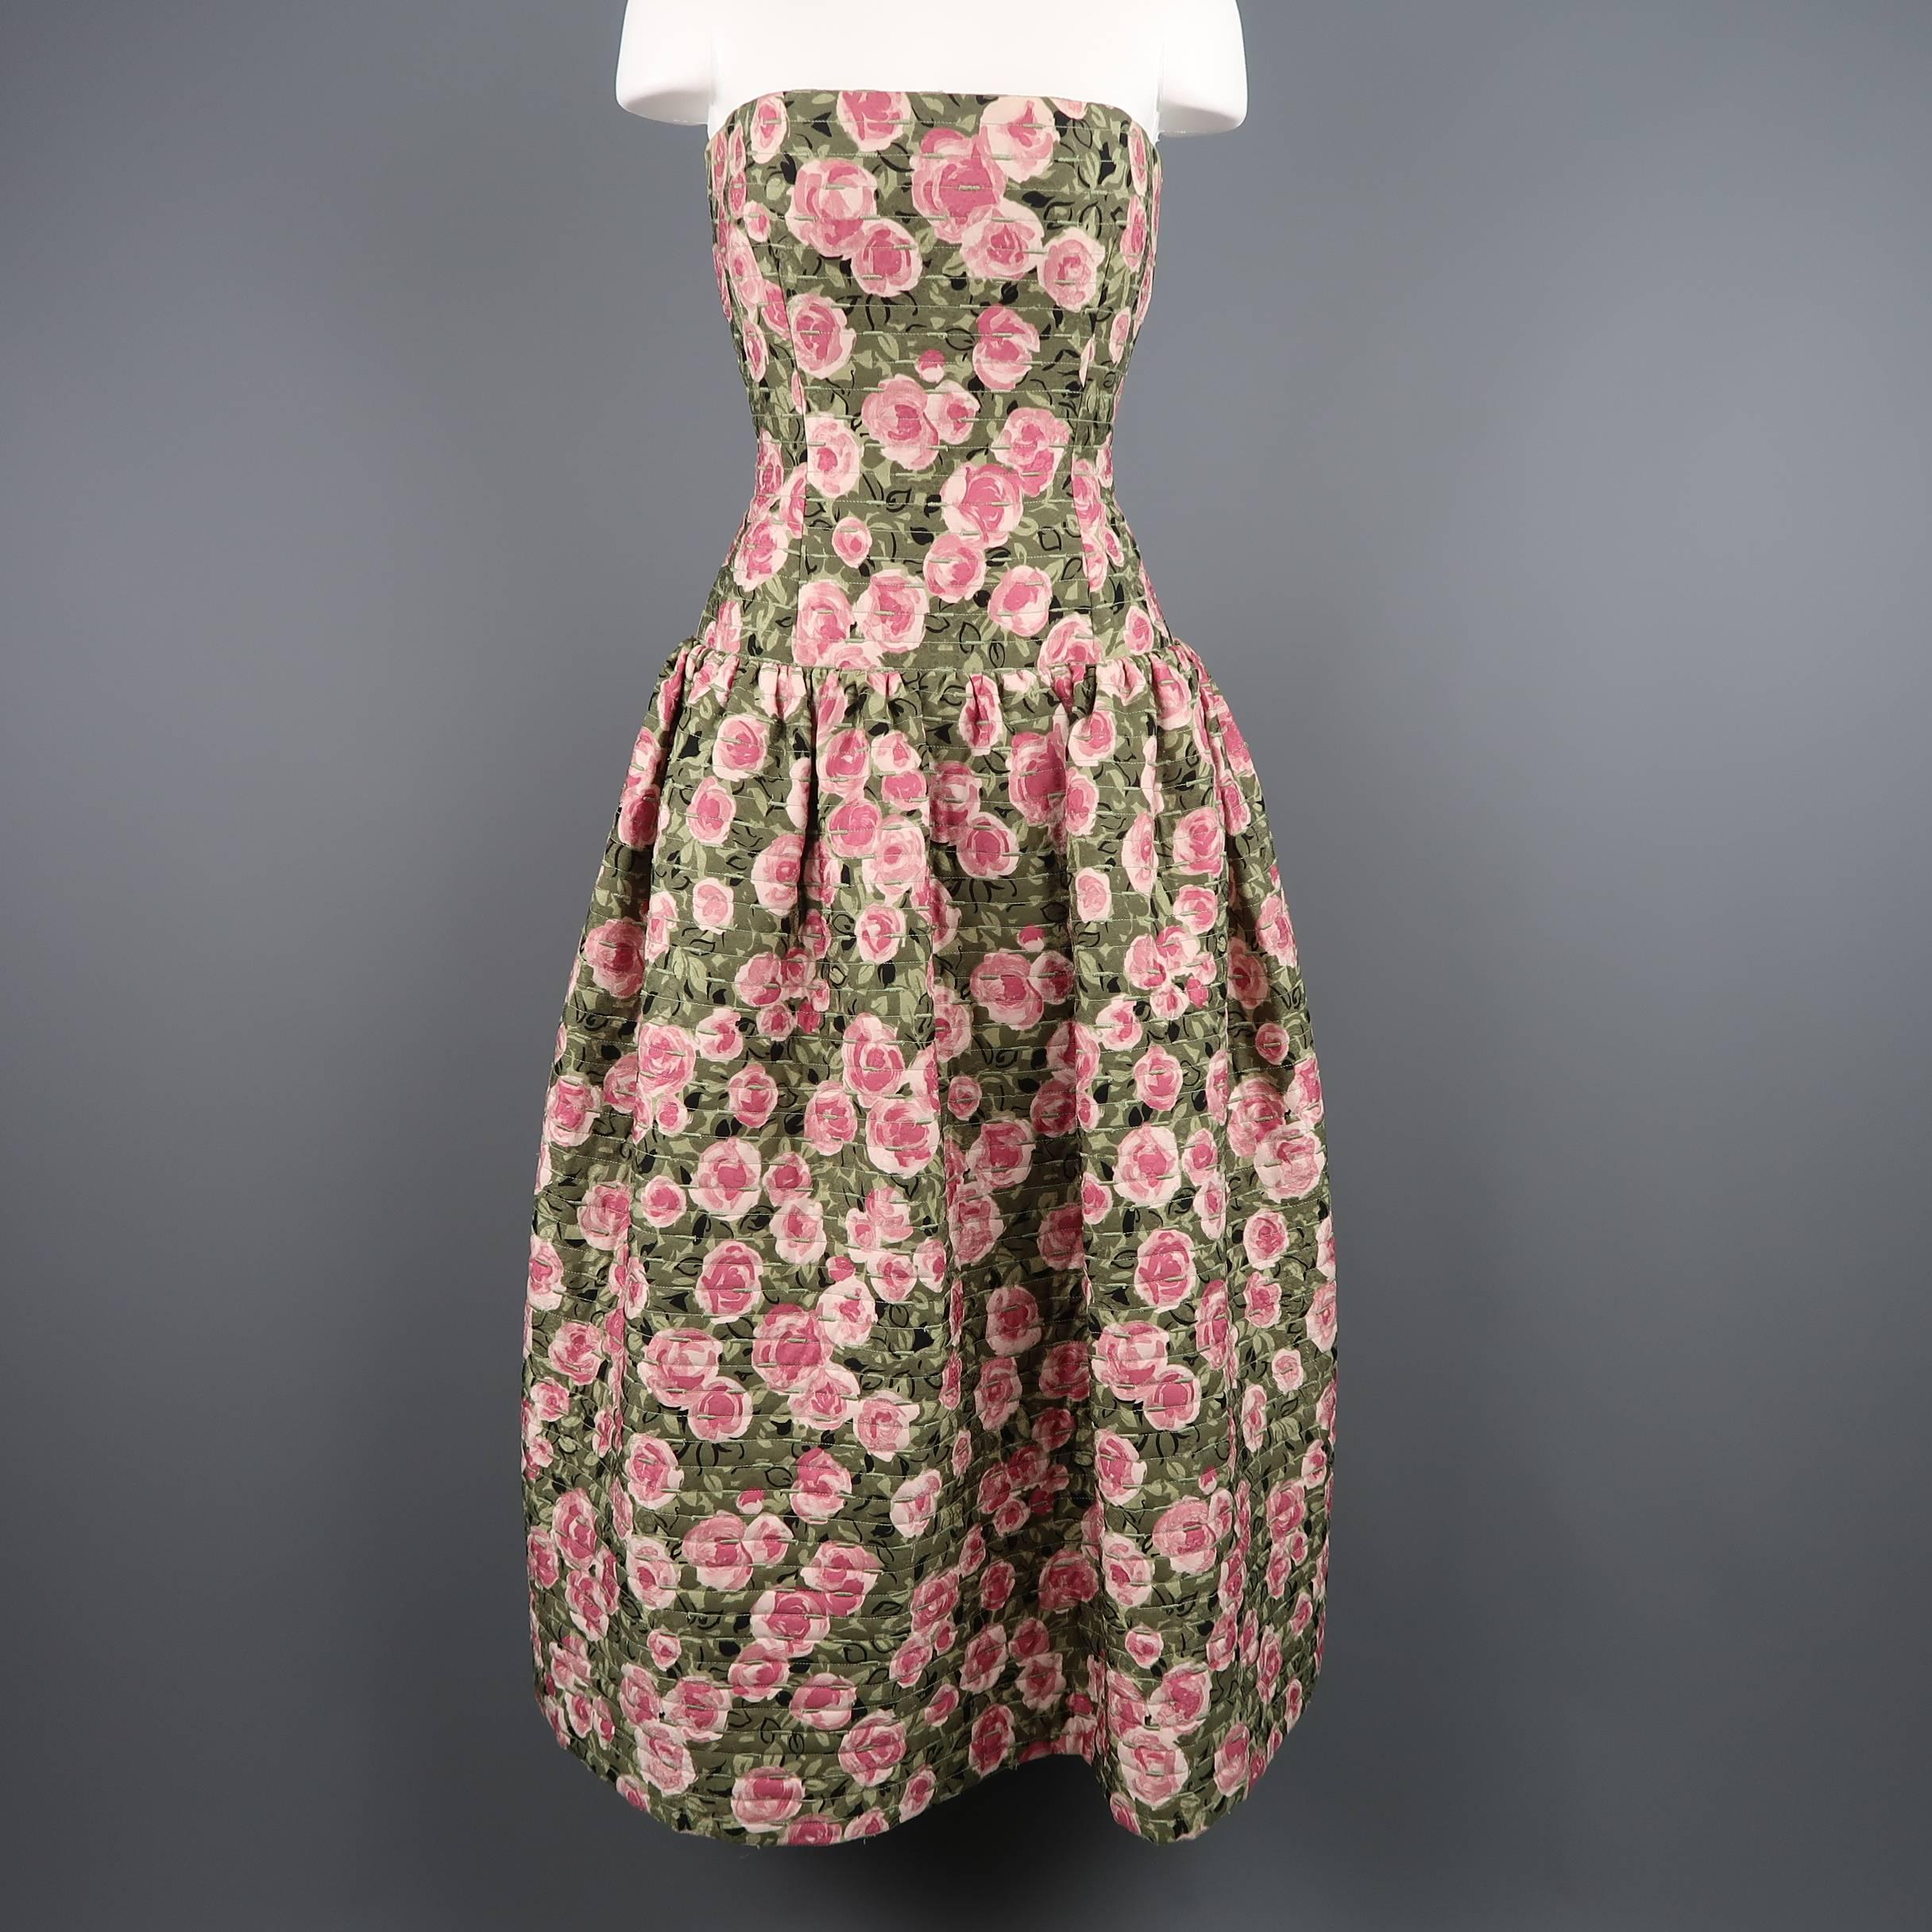 Vintage Bill Blass cocktail ensemble comes in green and pink rose print quilted rayon and includes a strapless bustier dress with drop waist gathered full skirt and matching double breasted jacket with dark brown mink fur trim, and satin bow on